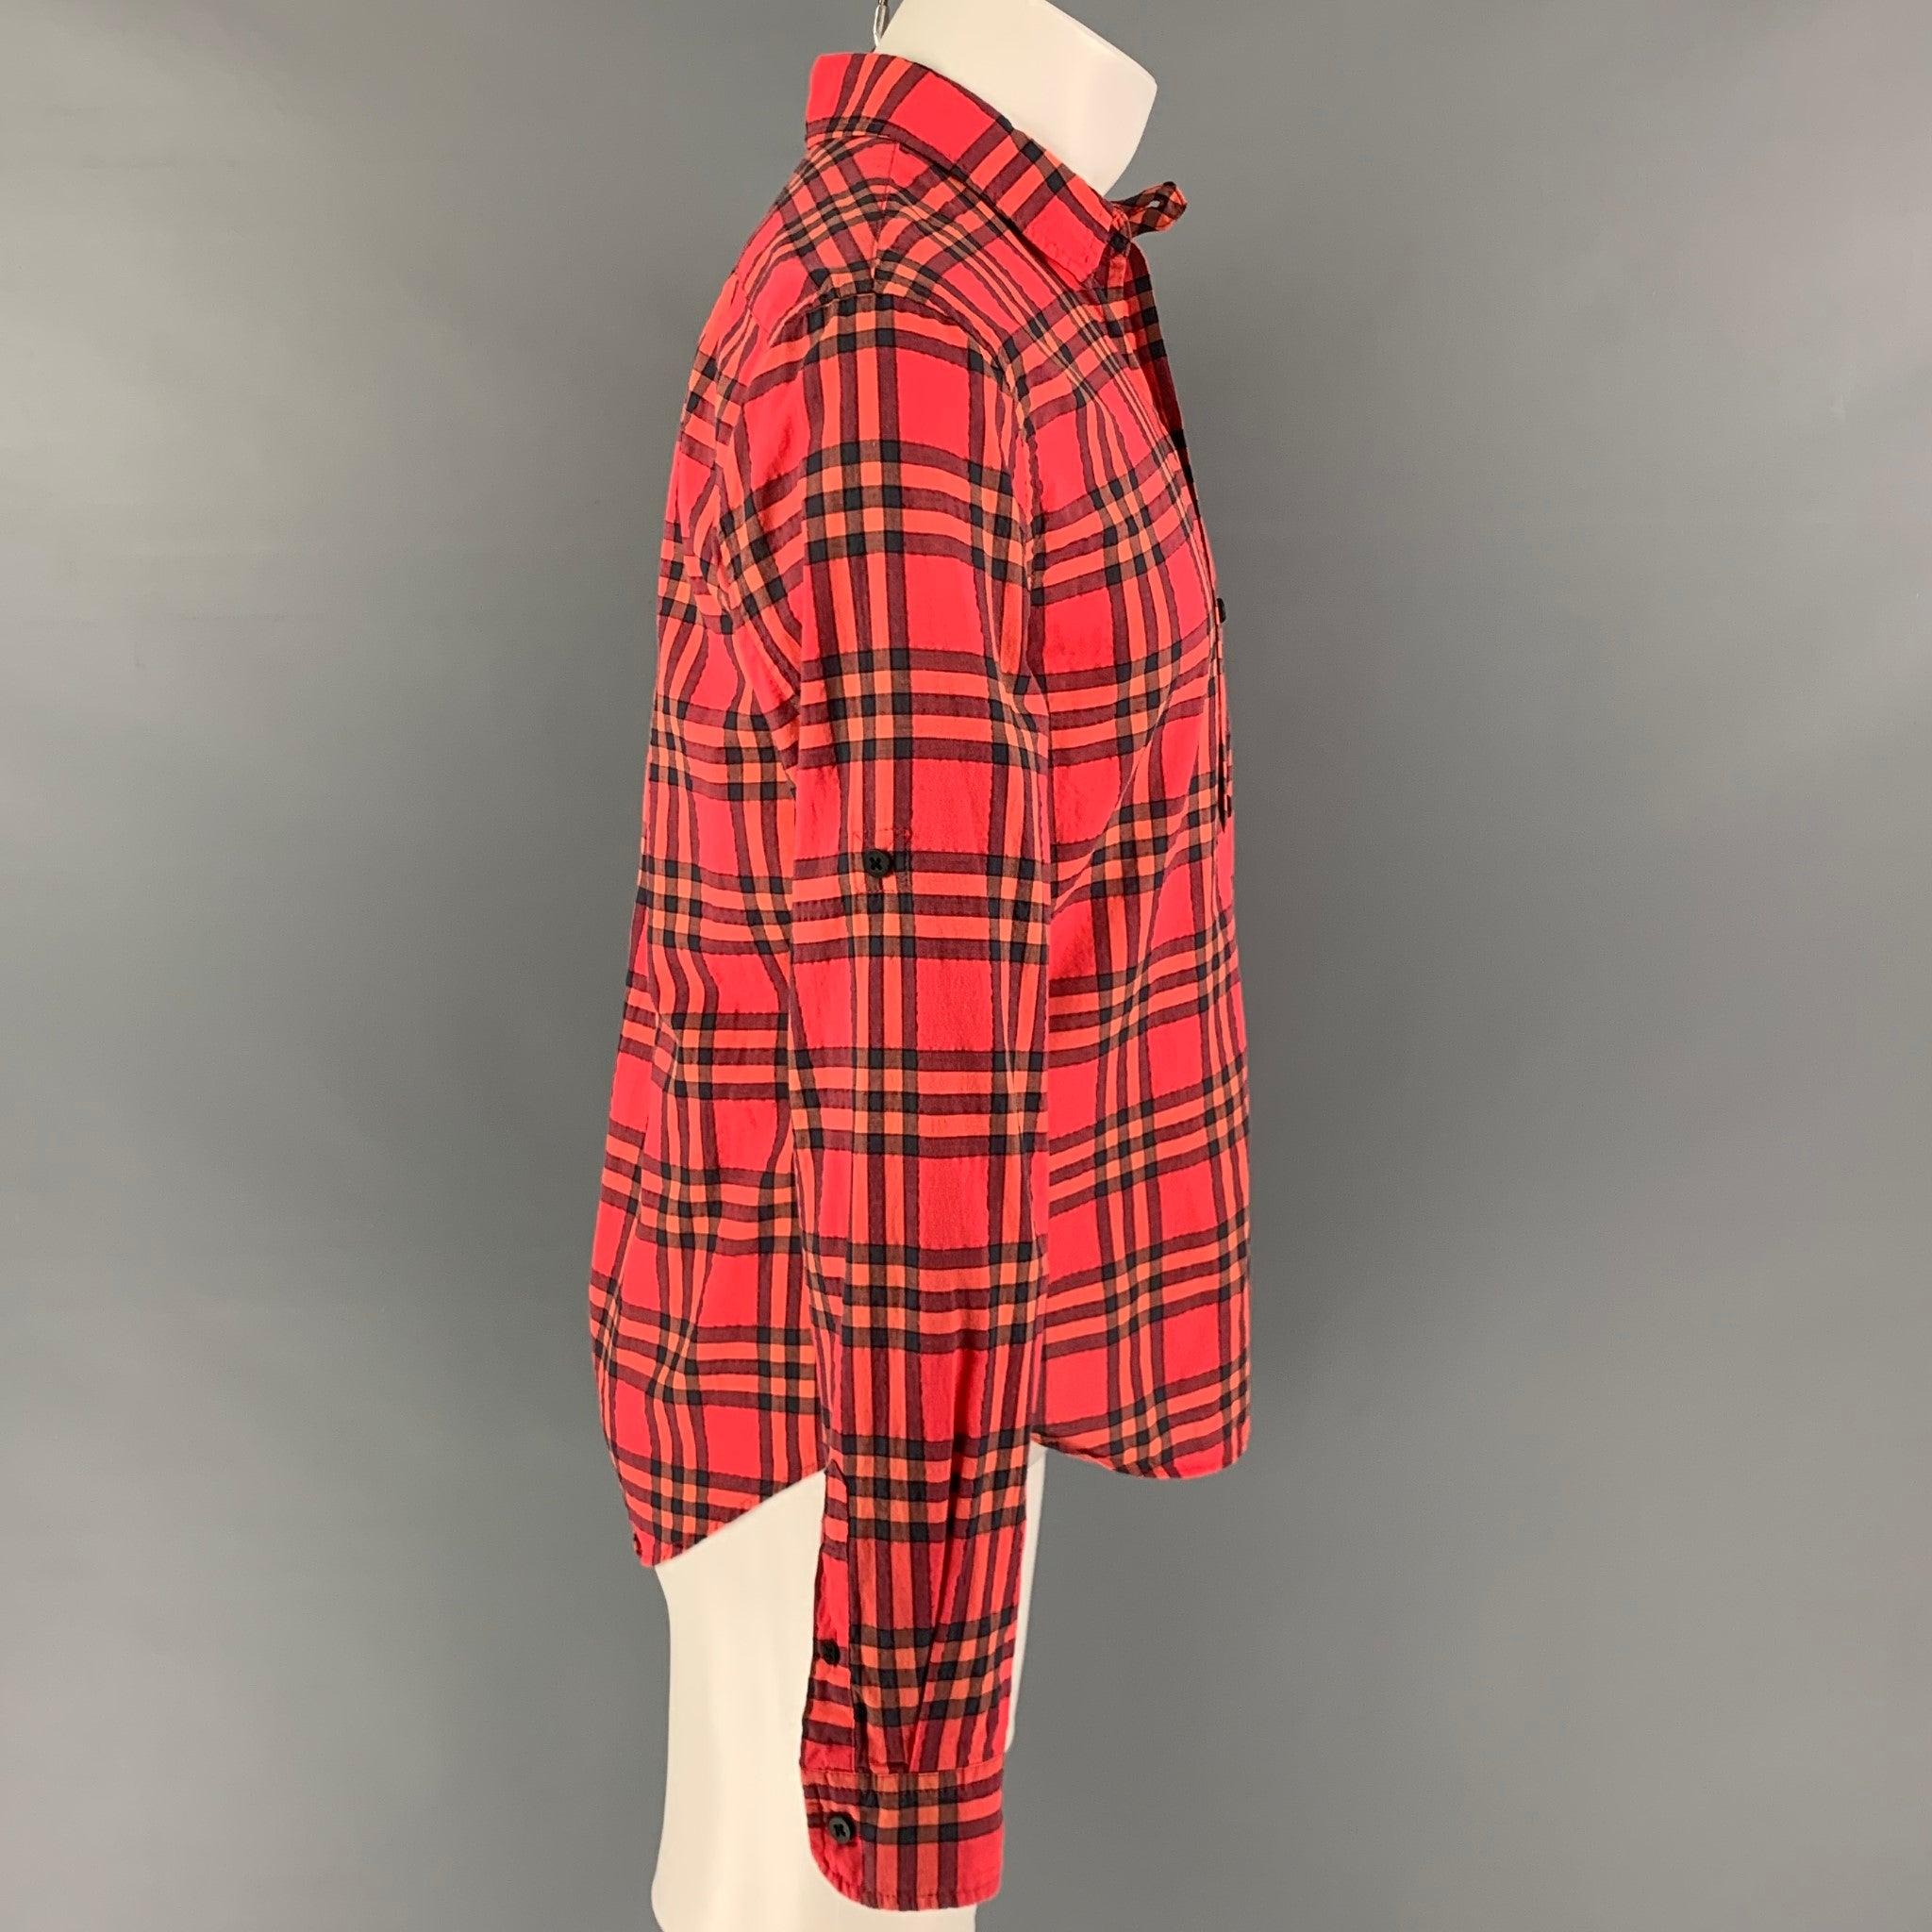 MARC by MARC JACOBS long sleeve shirt comes in a red & black plaid cotton blend featuring a shrunken fit, spread collar, and a button up closure.
Very Good
Pre-Owned Condition. 

Marked:   M  

Measurements: 
 
Shoulder: 18 inches Chest: 38 inches